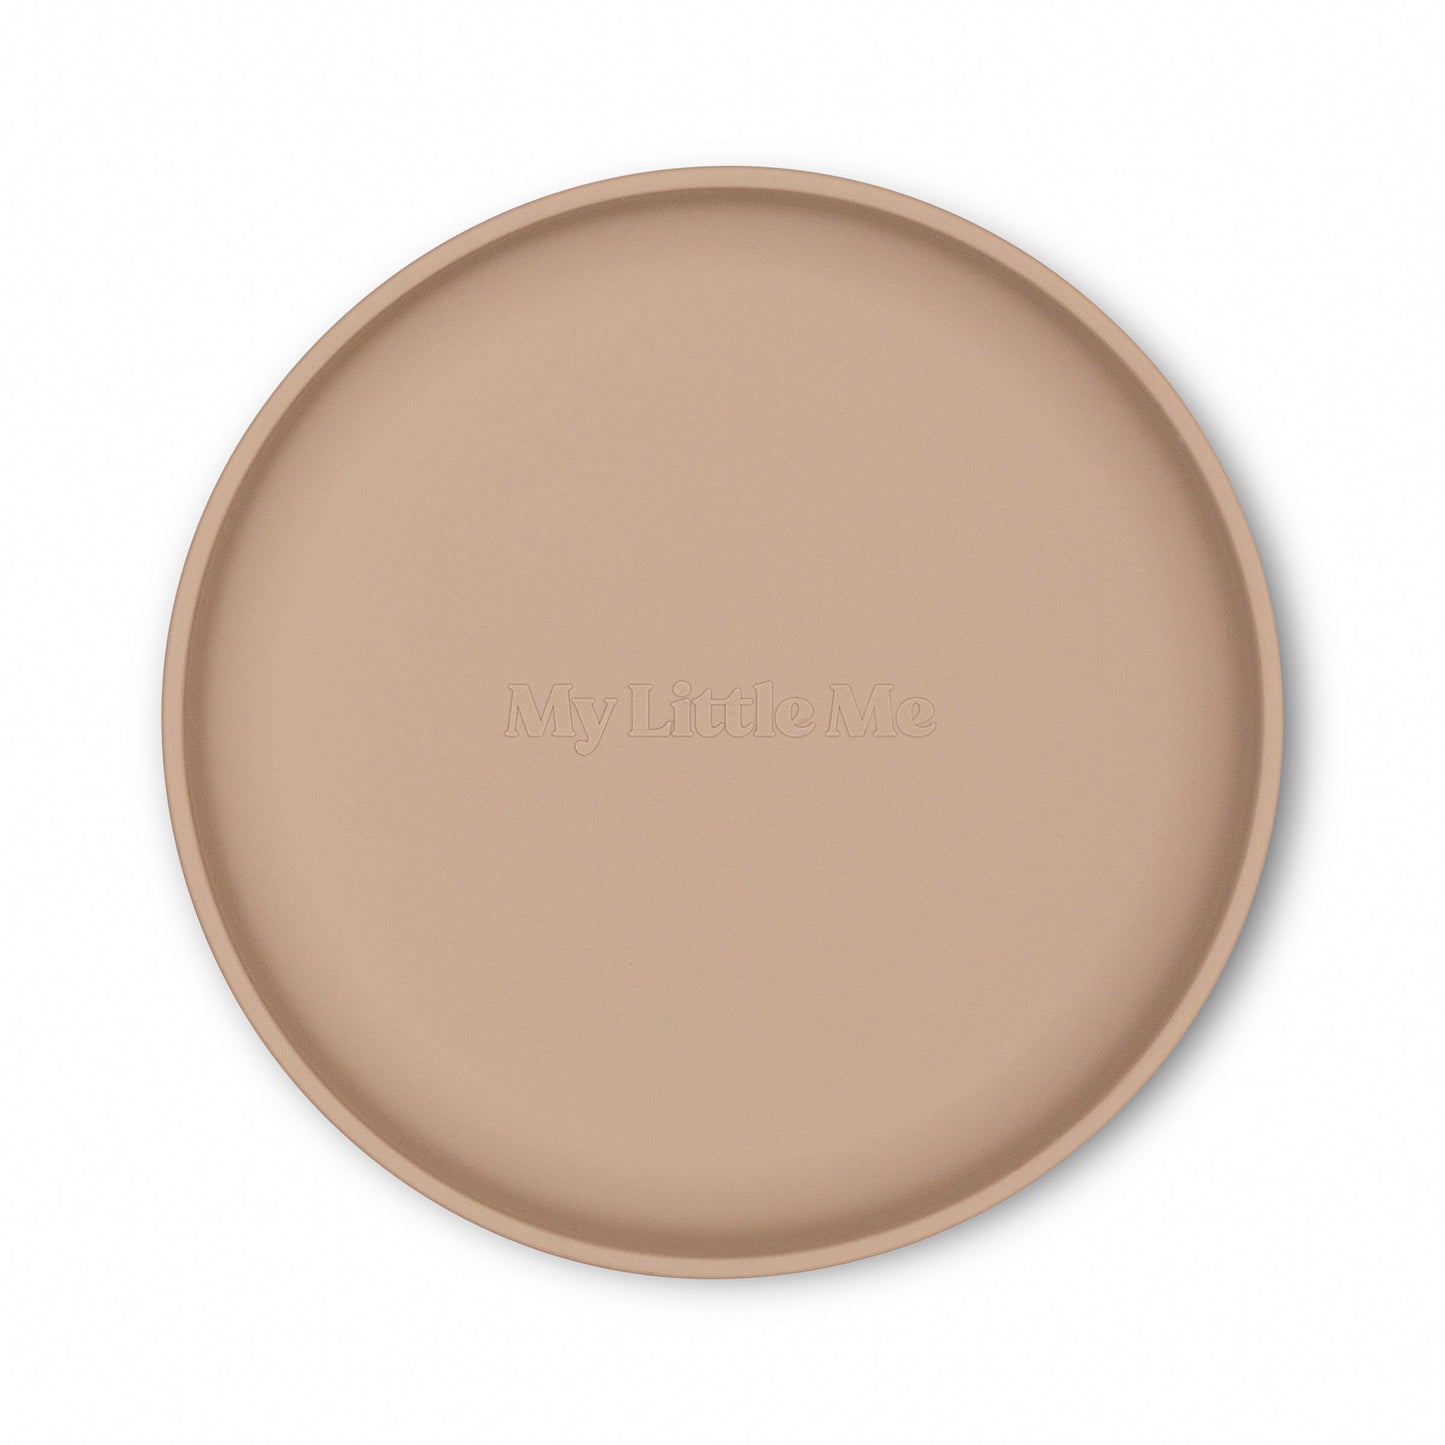 Silicone Dinner Plate